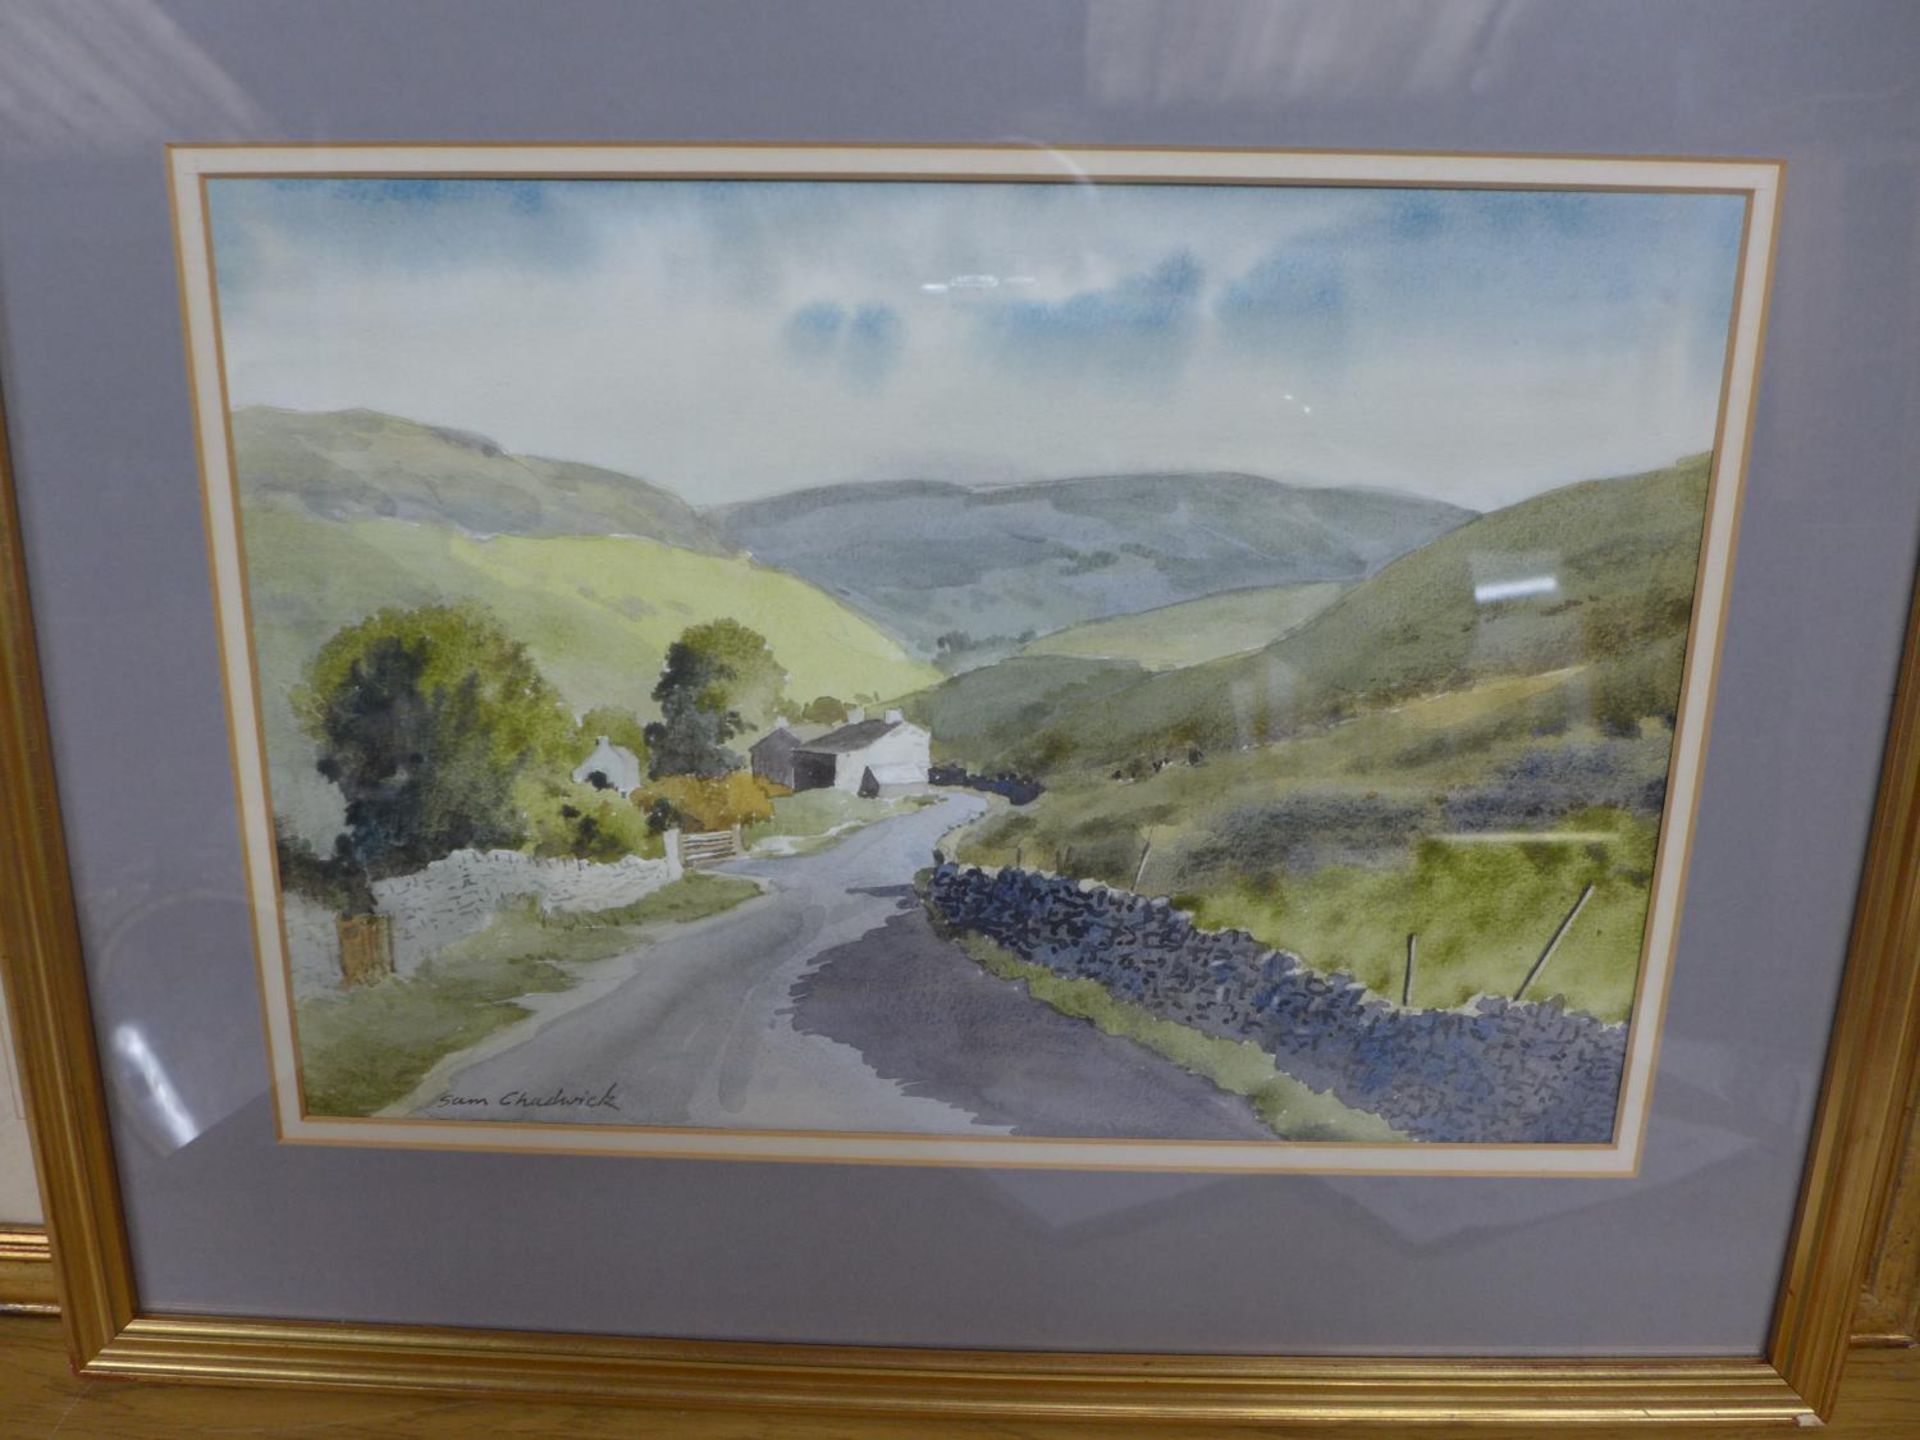 SAM CHADWICK (1902-1992) DALES SCENE, WATERCOLOUR, SIGNED, 27X39CM, FRAMED AND GLAZED